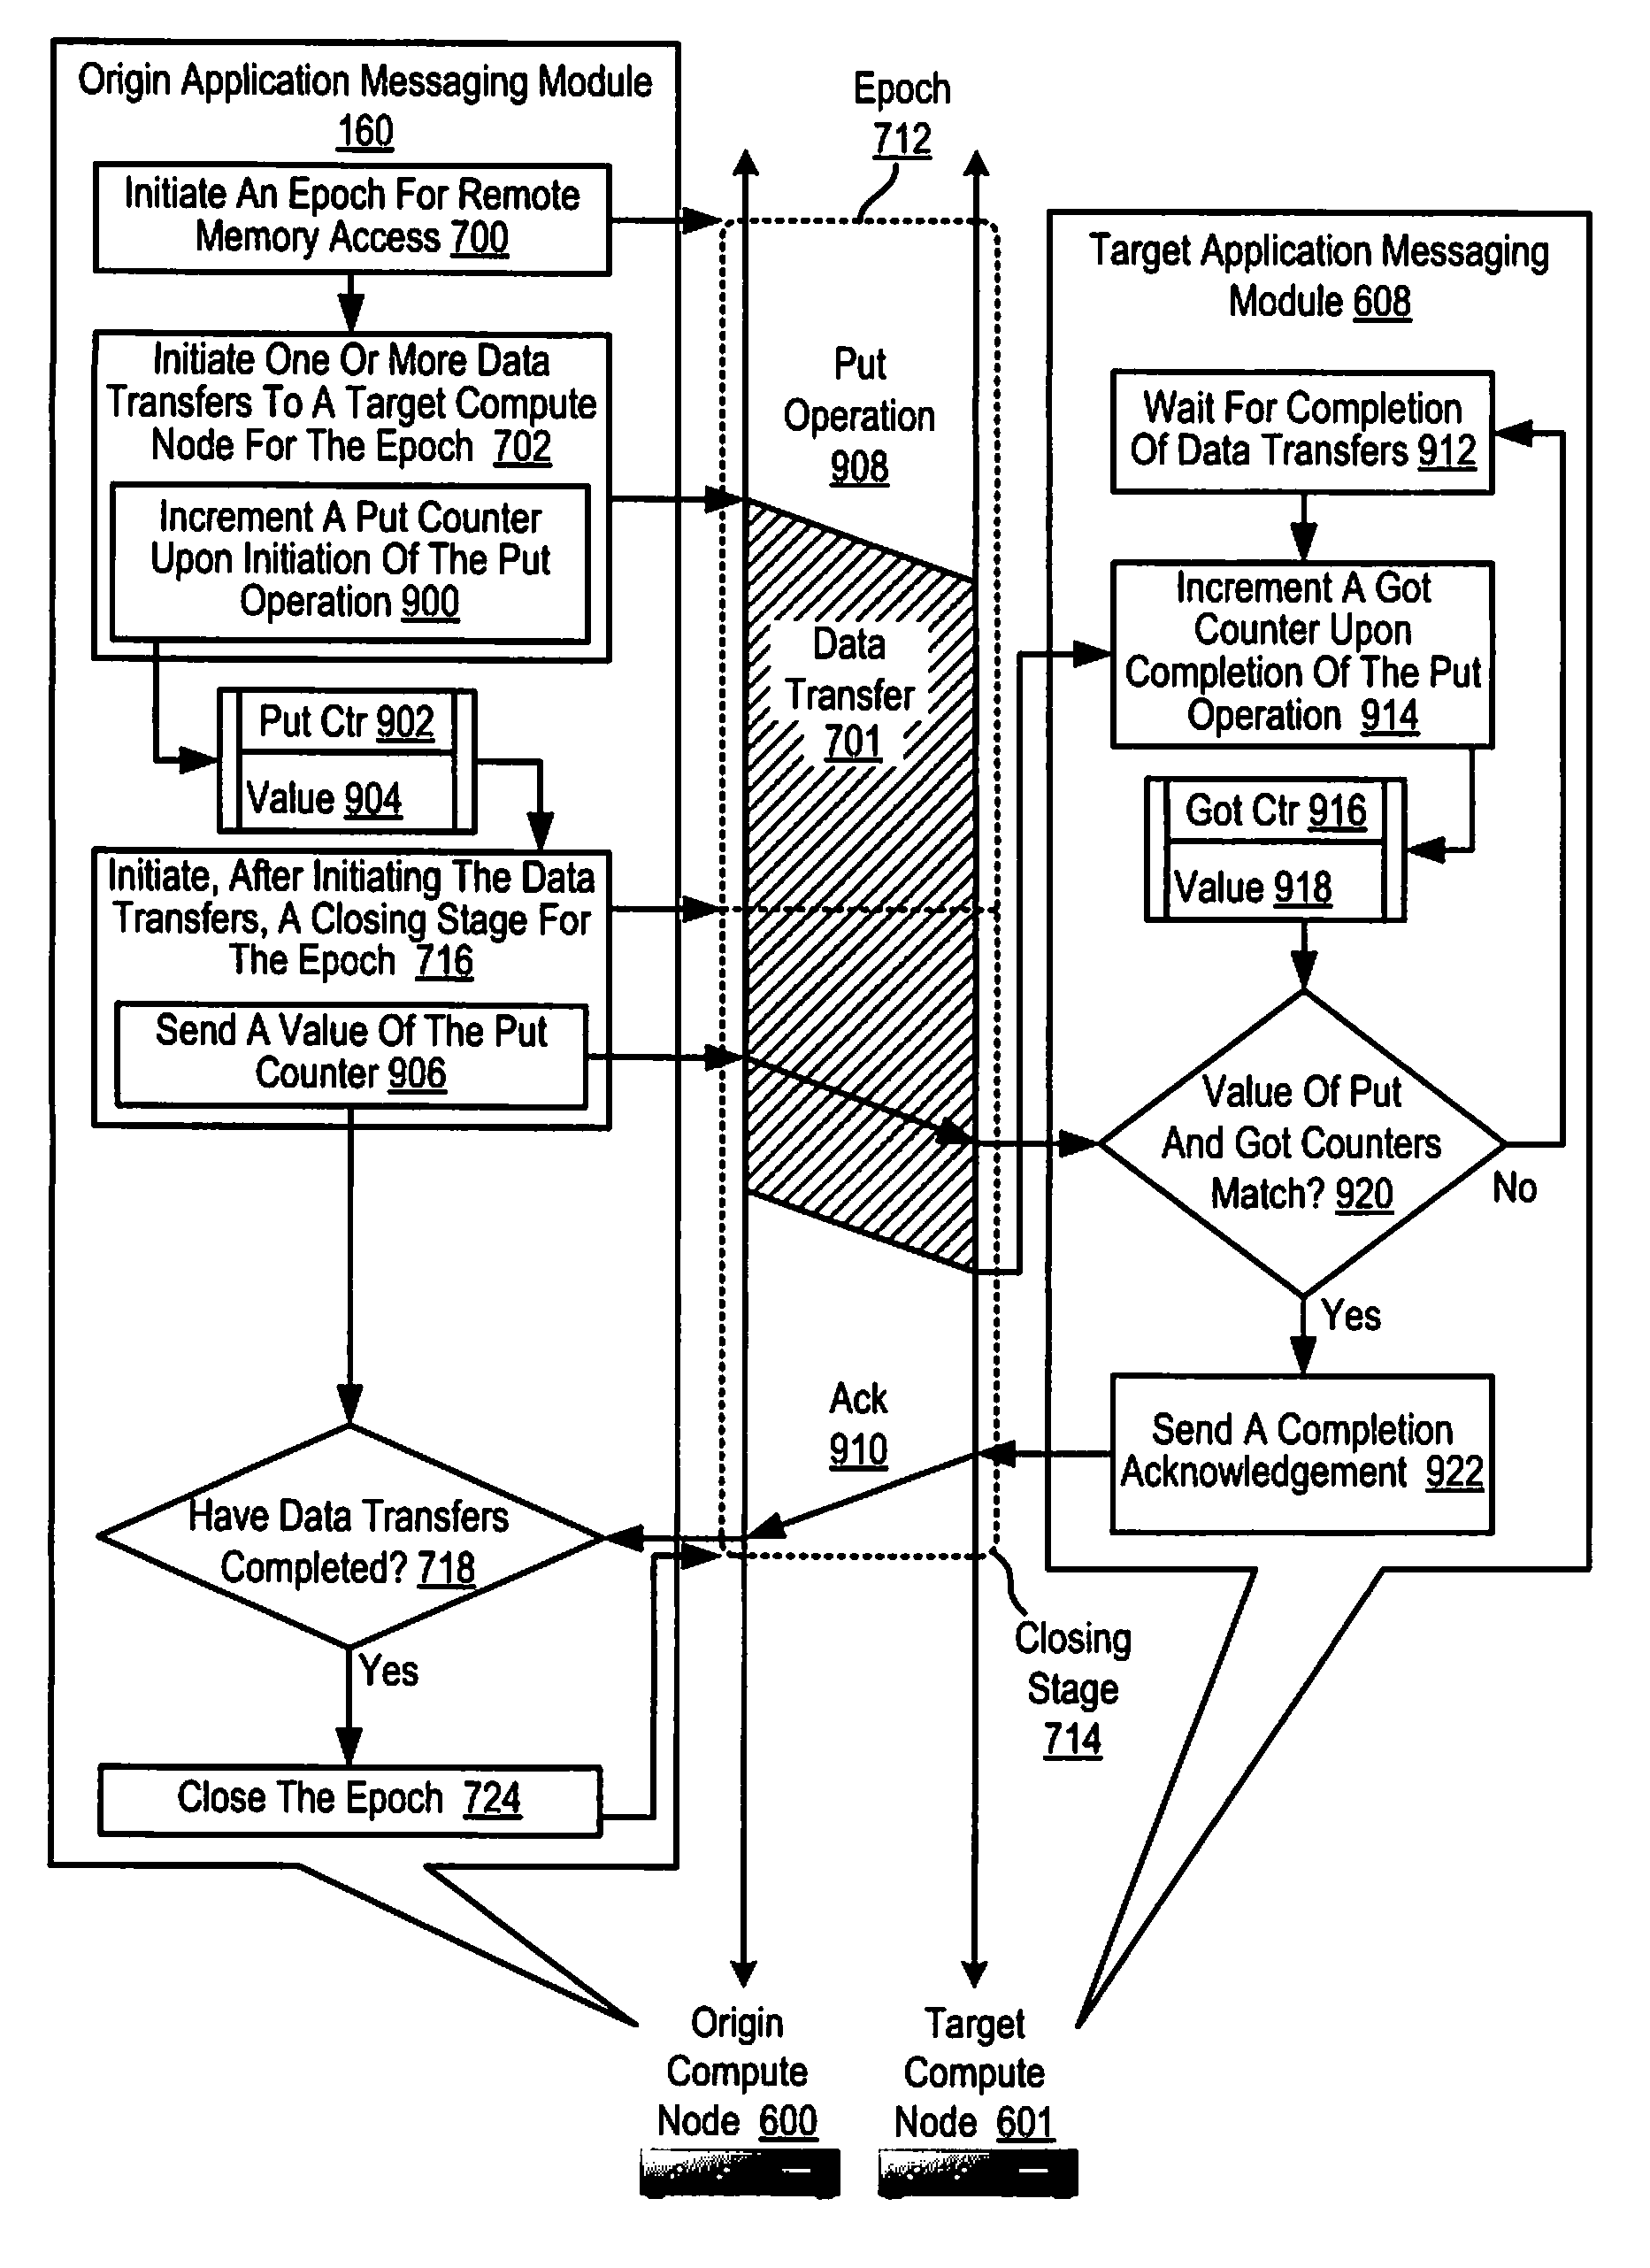 Administering an Epoch Initiated for Remote Memory Access